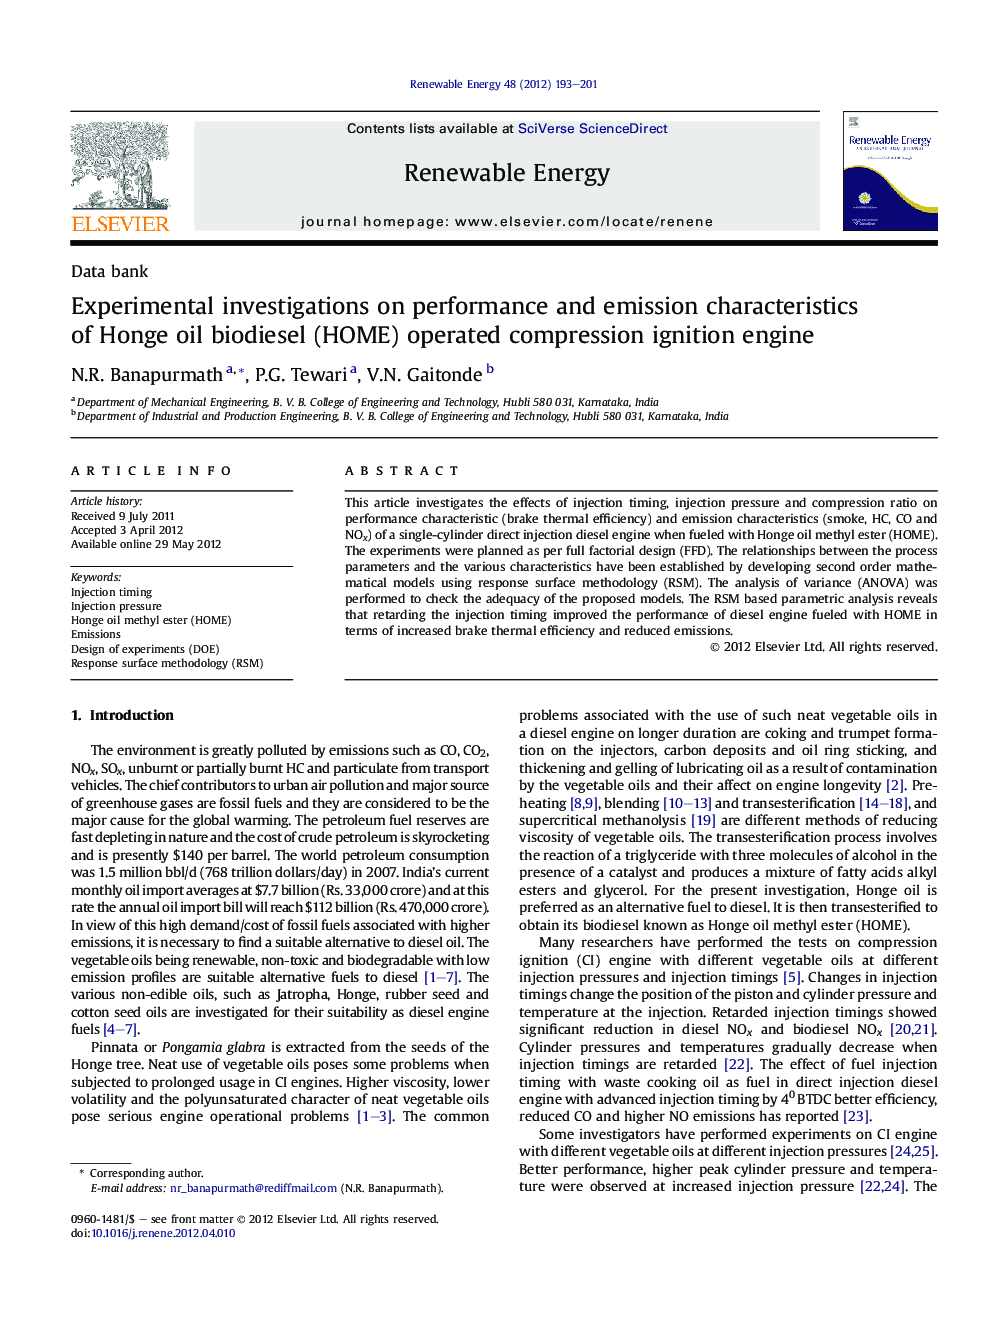 Experimental investigations on performance and emission characteristics of Honge oil biodiesel (HOME) operated compression ignition engine